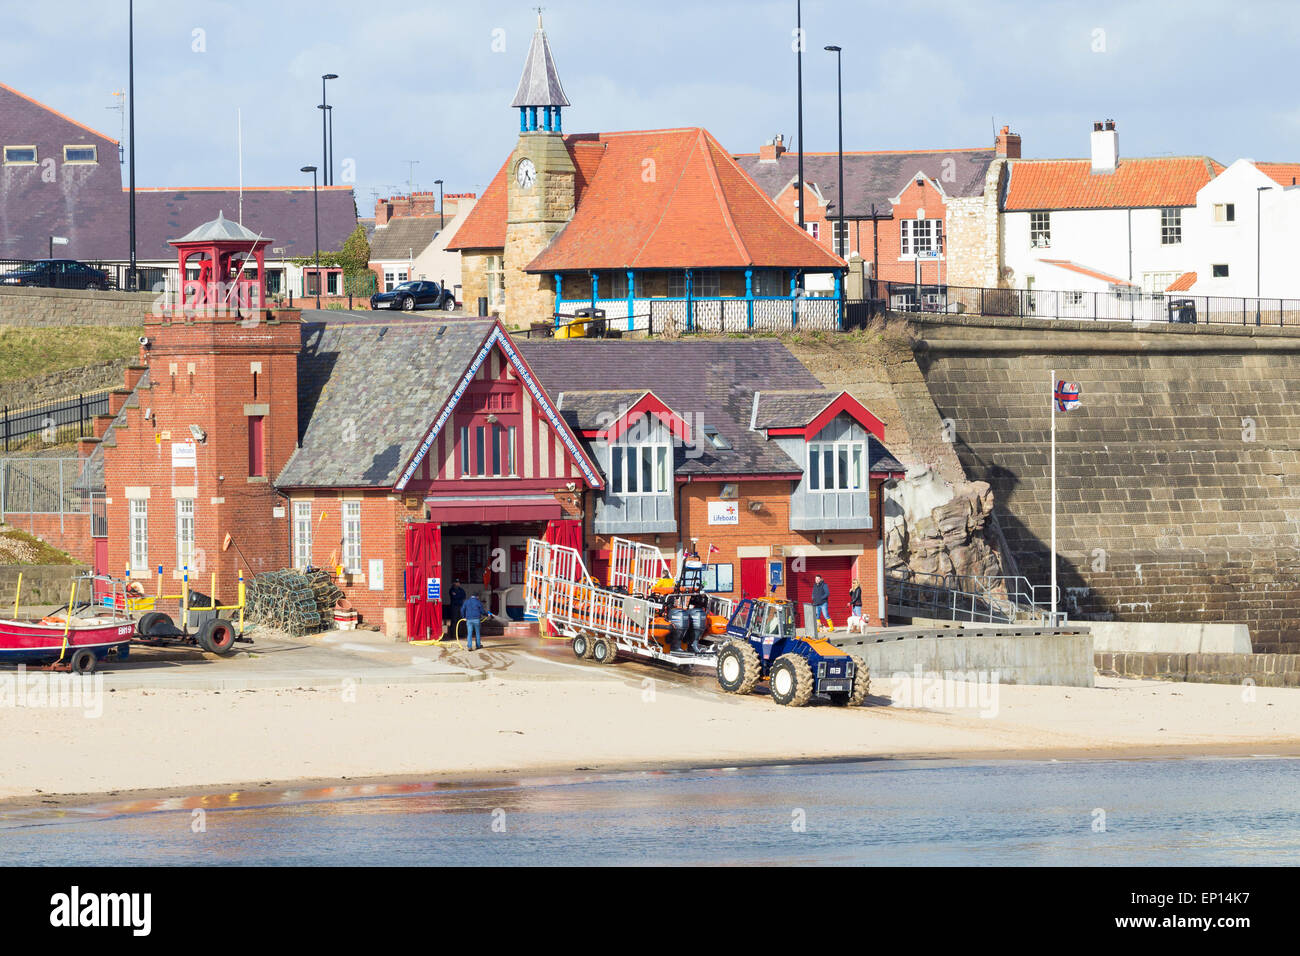 Cullercoats RNLI Lifeboat station. Cullercoats, north east England, UK Stock Photo